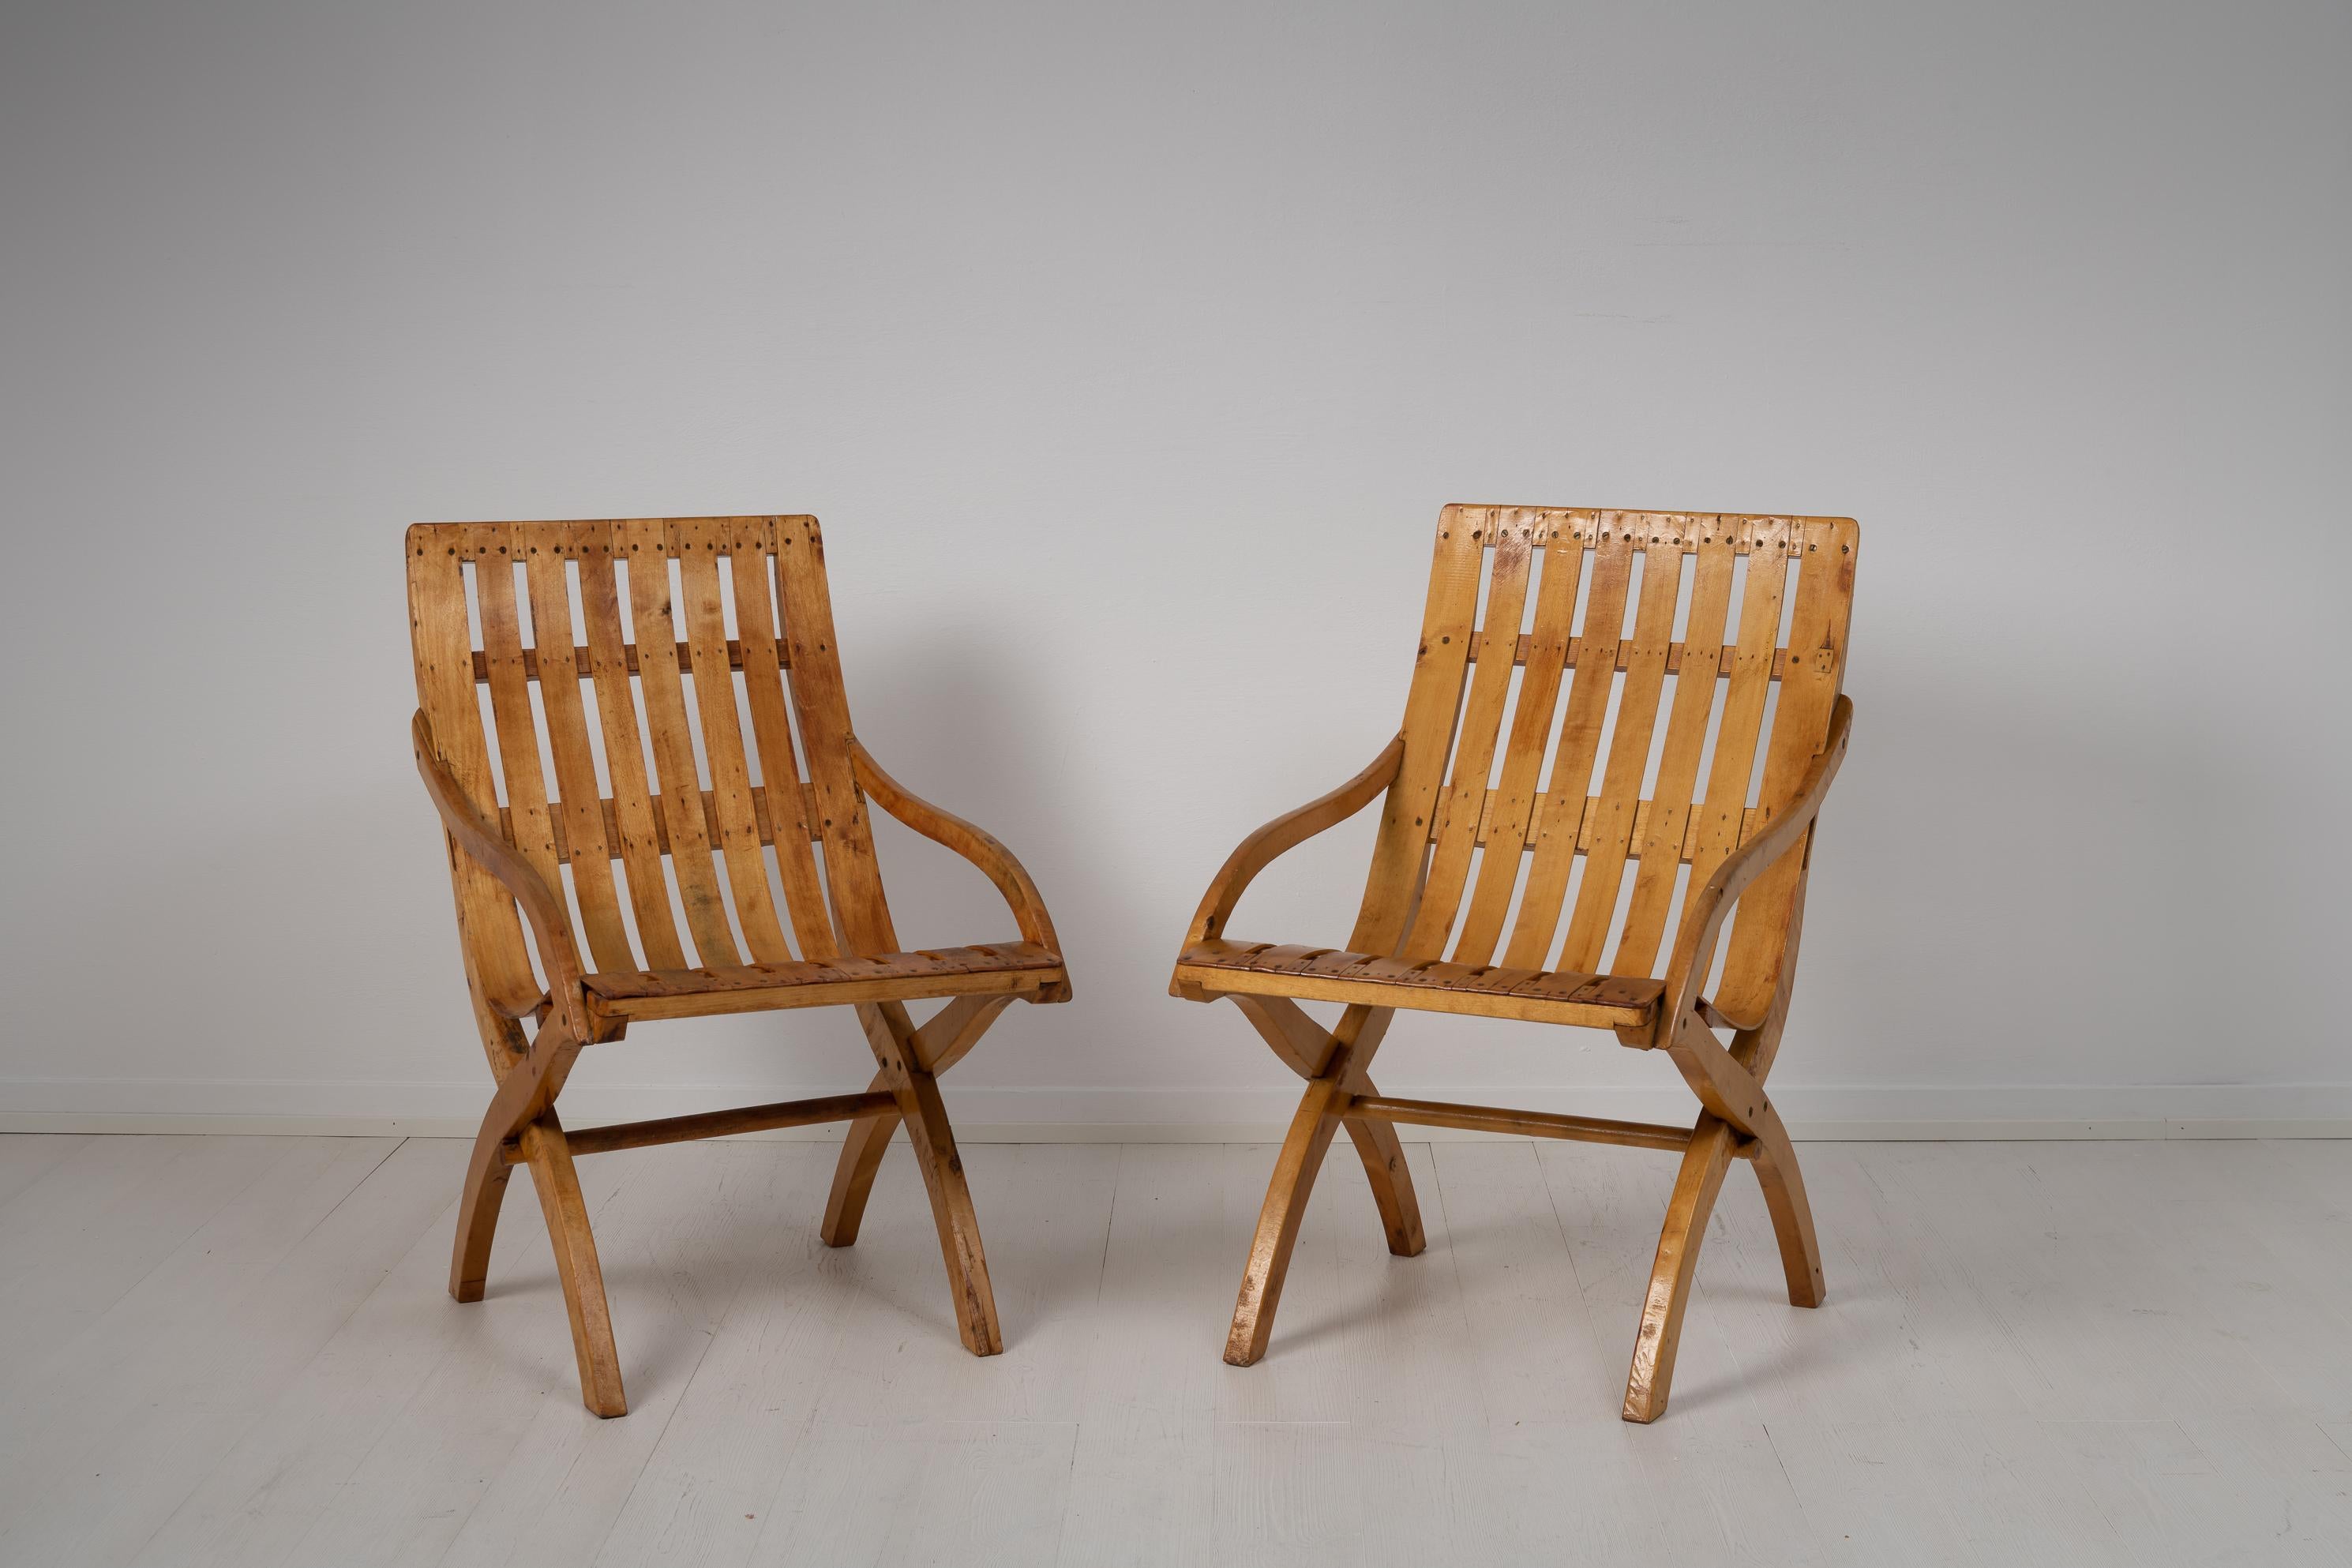 Bare wood pine and birch armchairs from the 1930s, during the Swedish Grace period. The chairs are bare wood and has the typical characteristics of Swedish design from the period. Featuring balanced designs and functional elegance. The chairs are of